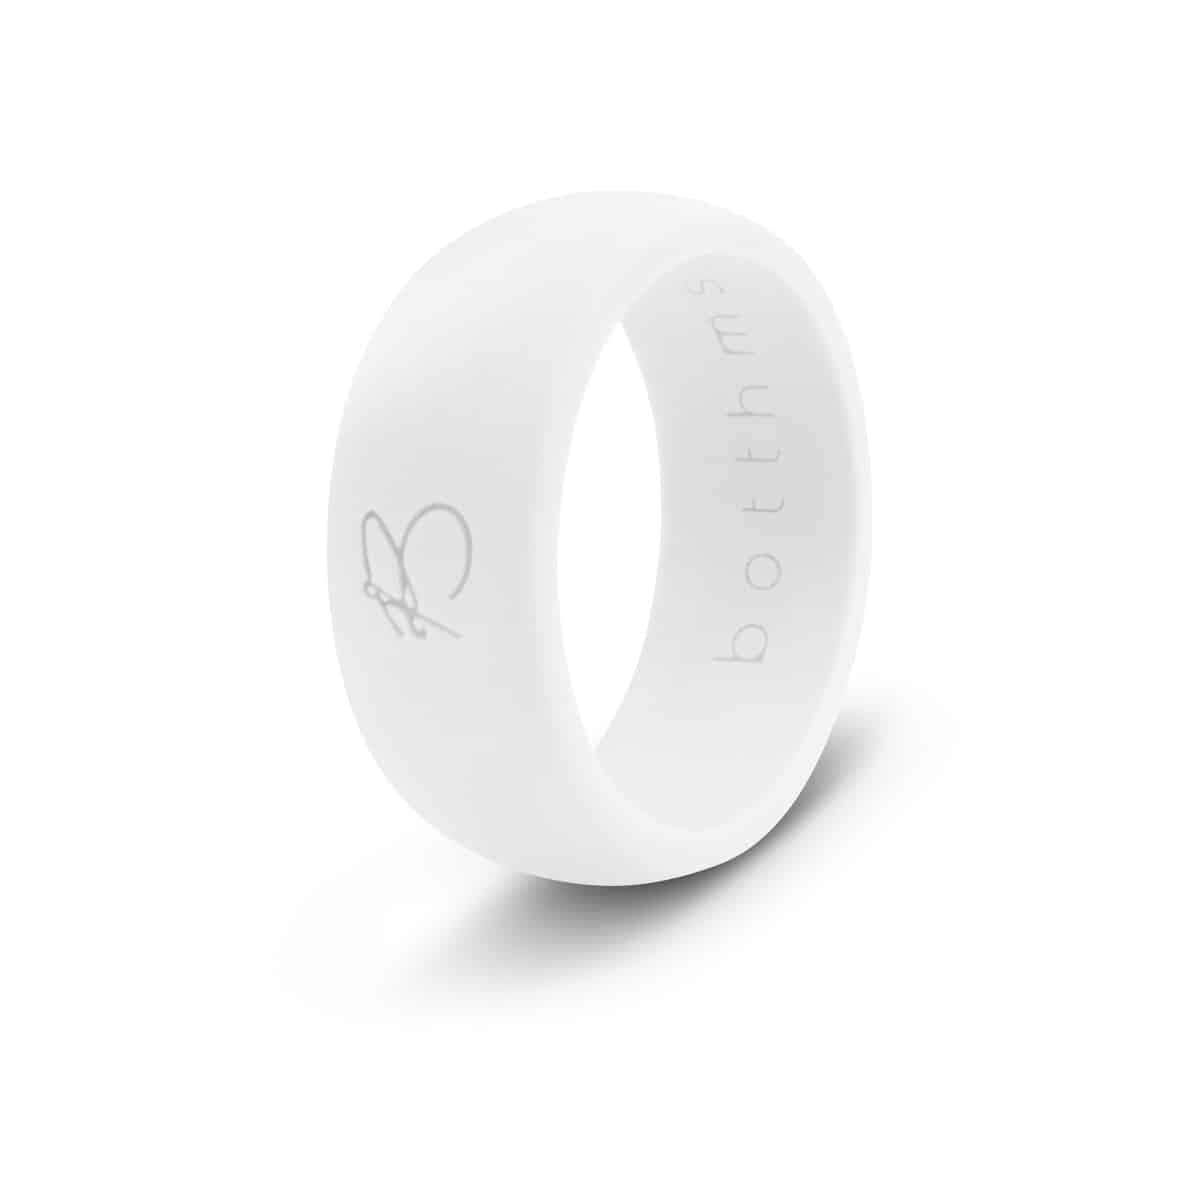  Silicone Fitness Rings